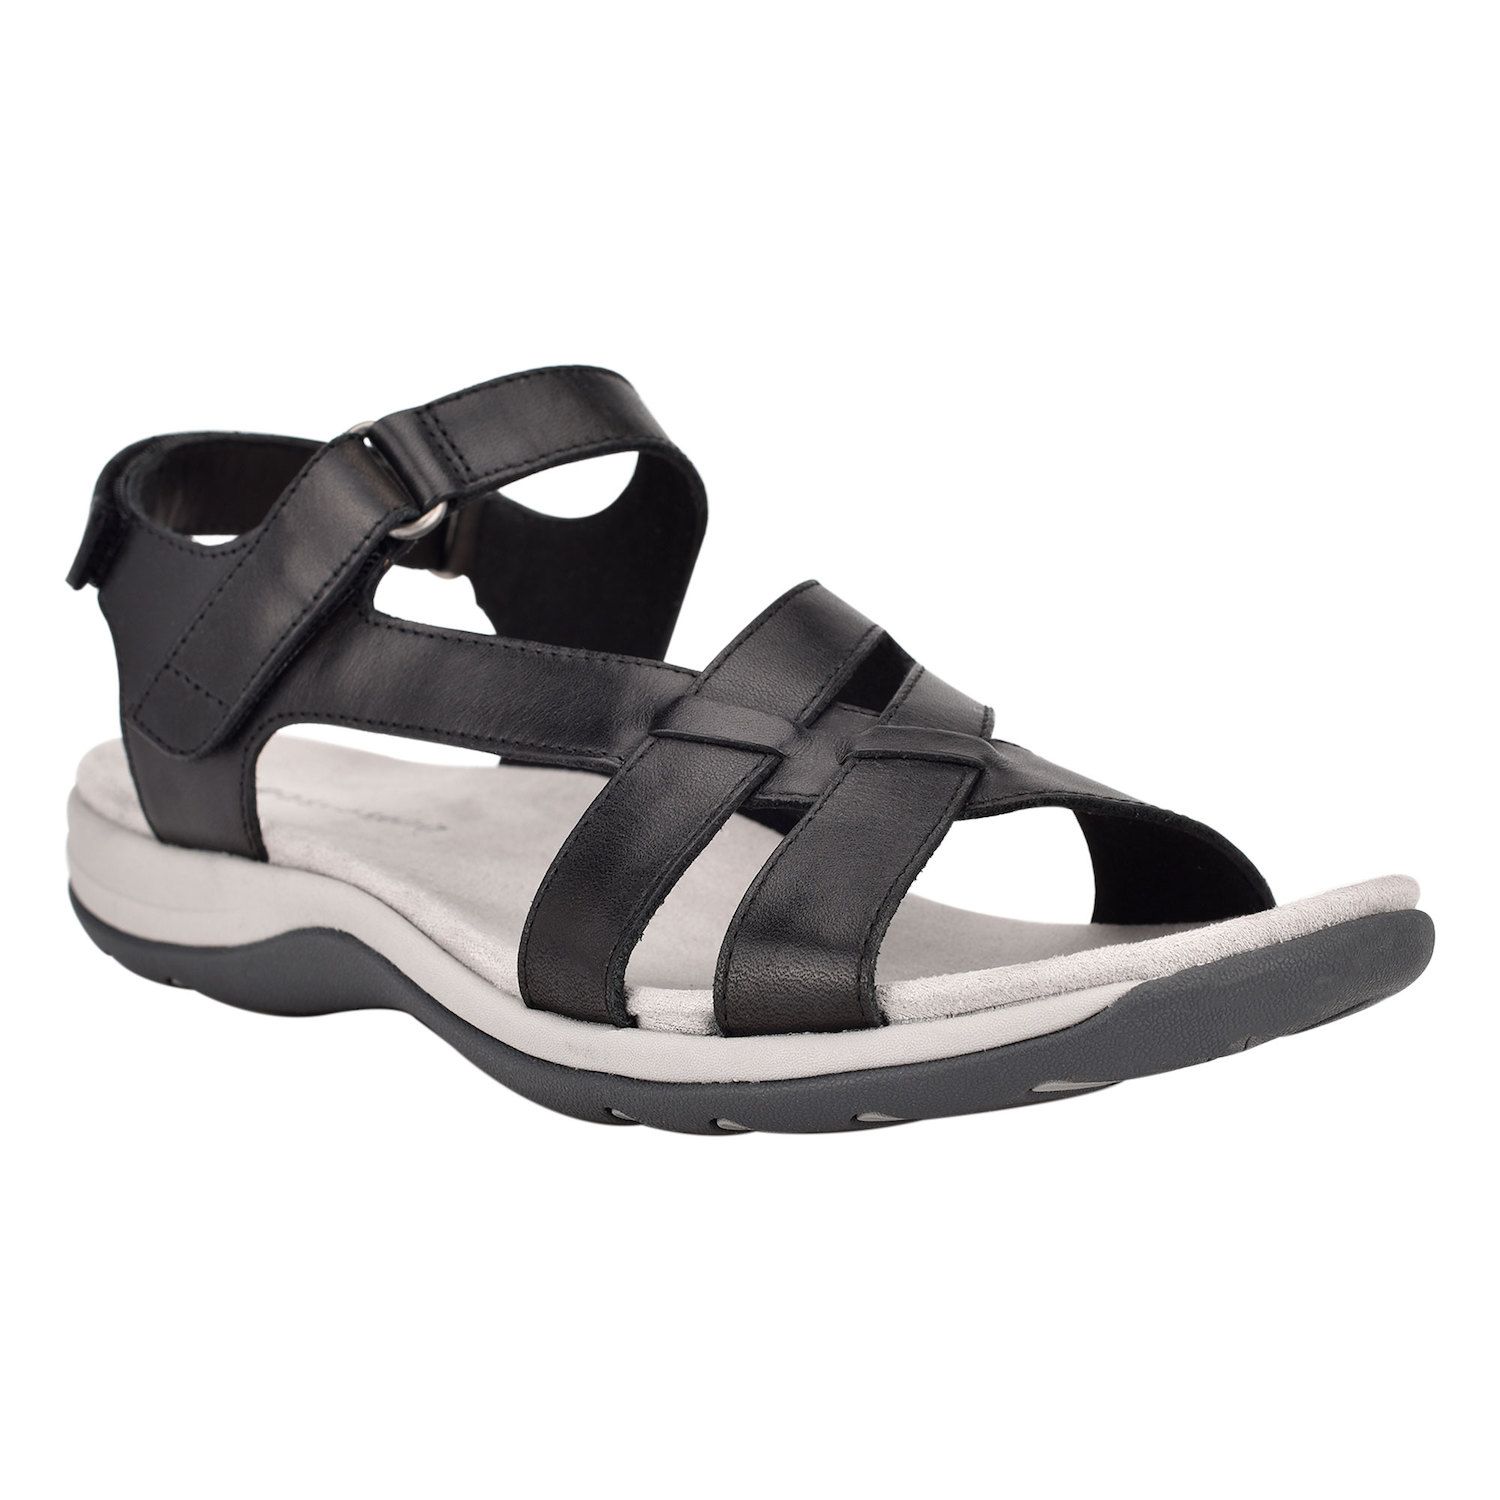 Image for Easy Spirit Silvie Women's Leather Strappy Sandals at Kohl's.